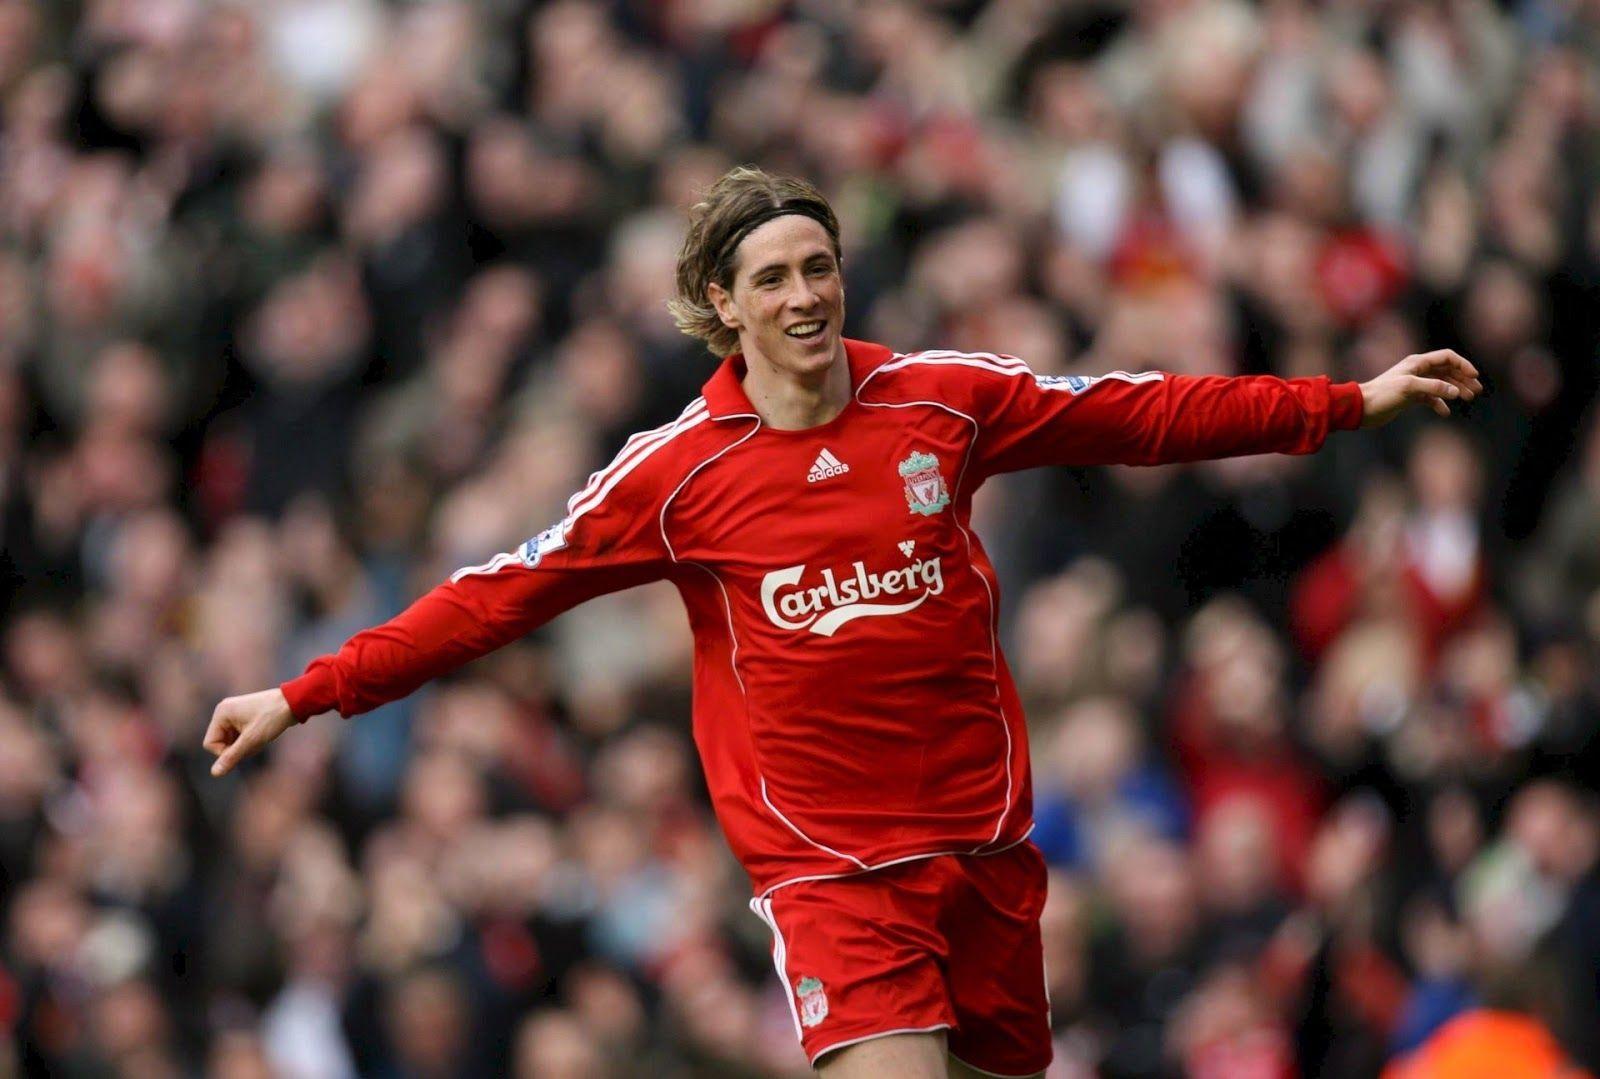 Fernando Torres Latest HD Wallpaper And Image Gallery Free